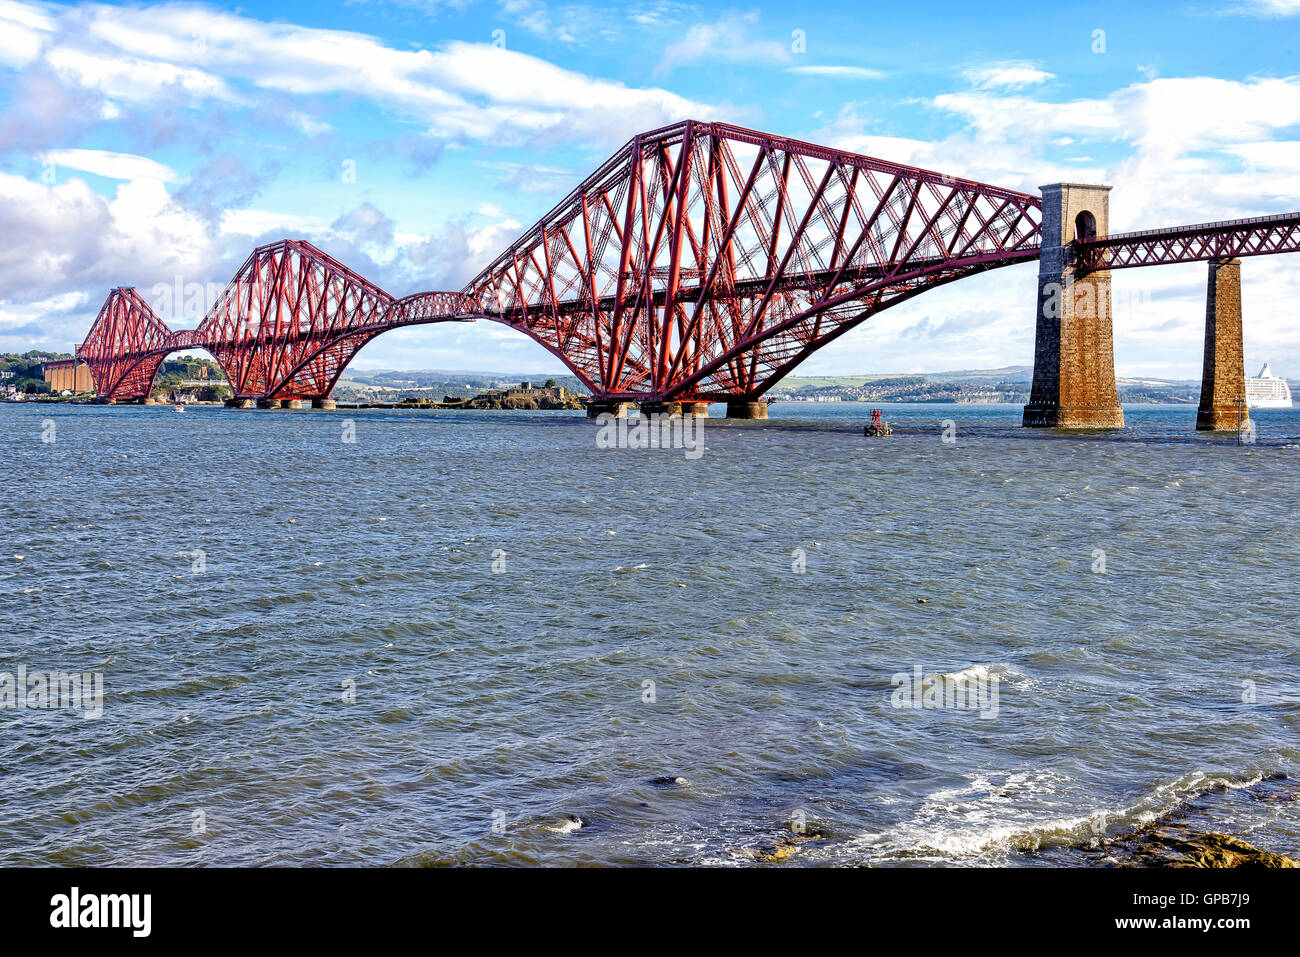 View of Forth Bridge, Scotland, UK. Fort Bridge is a cantilever railway bridge considered an iconic structure. Stock Photo